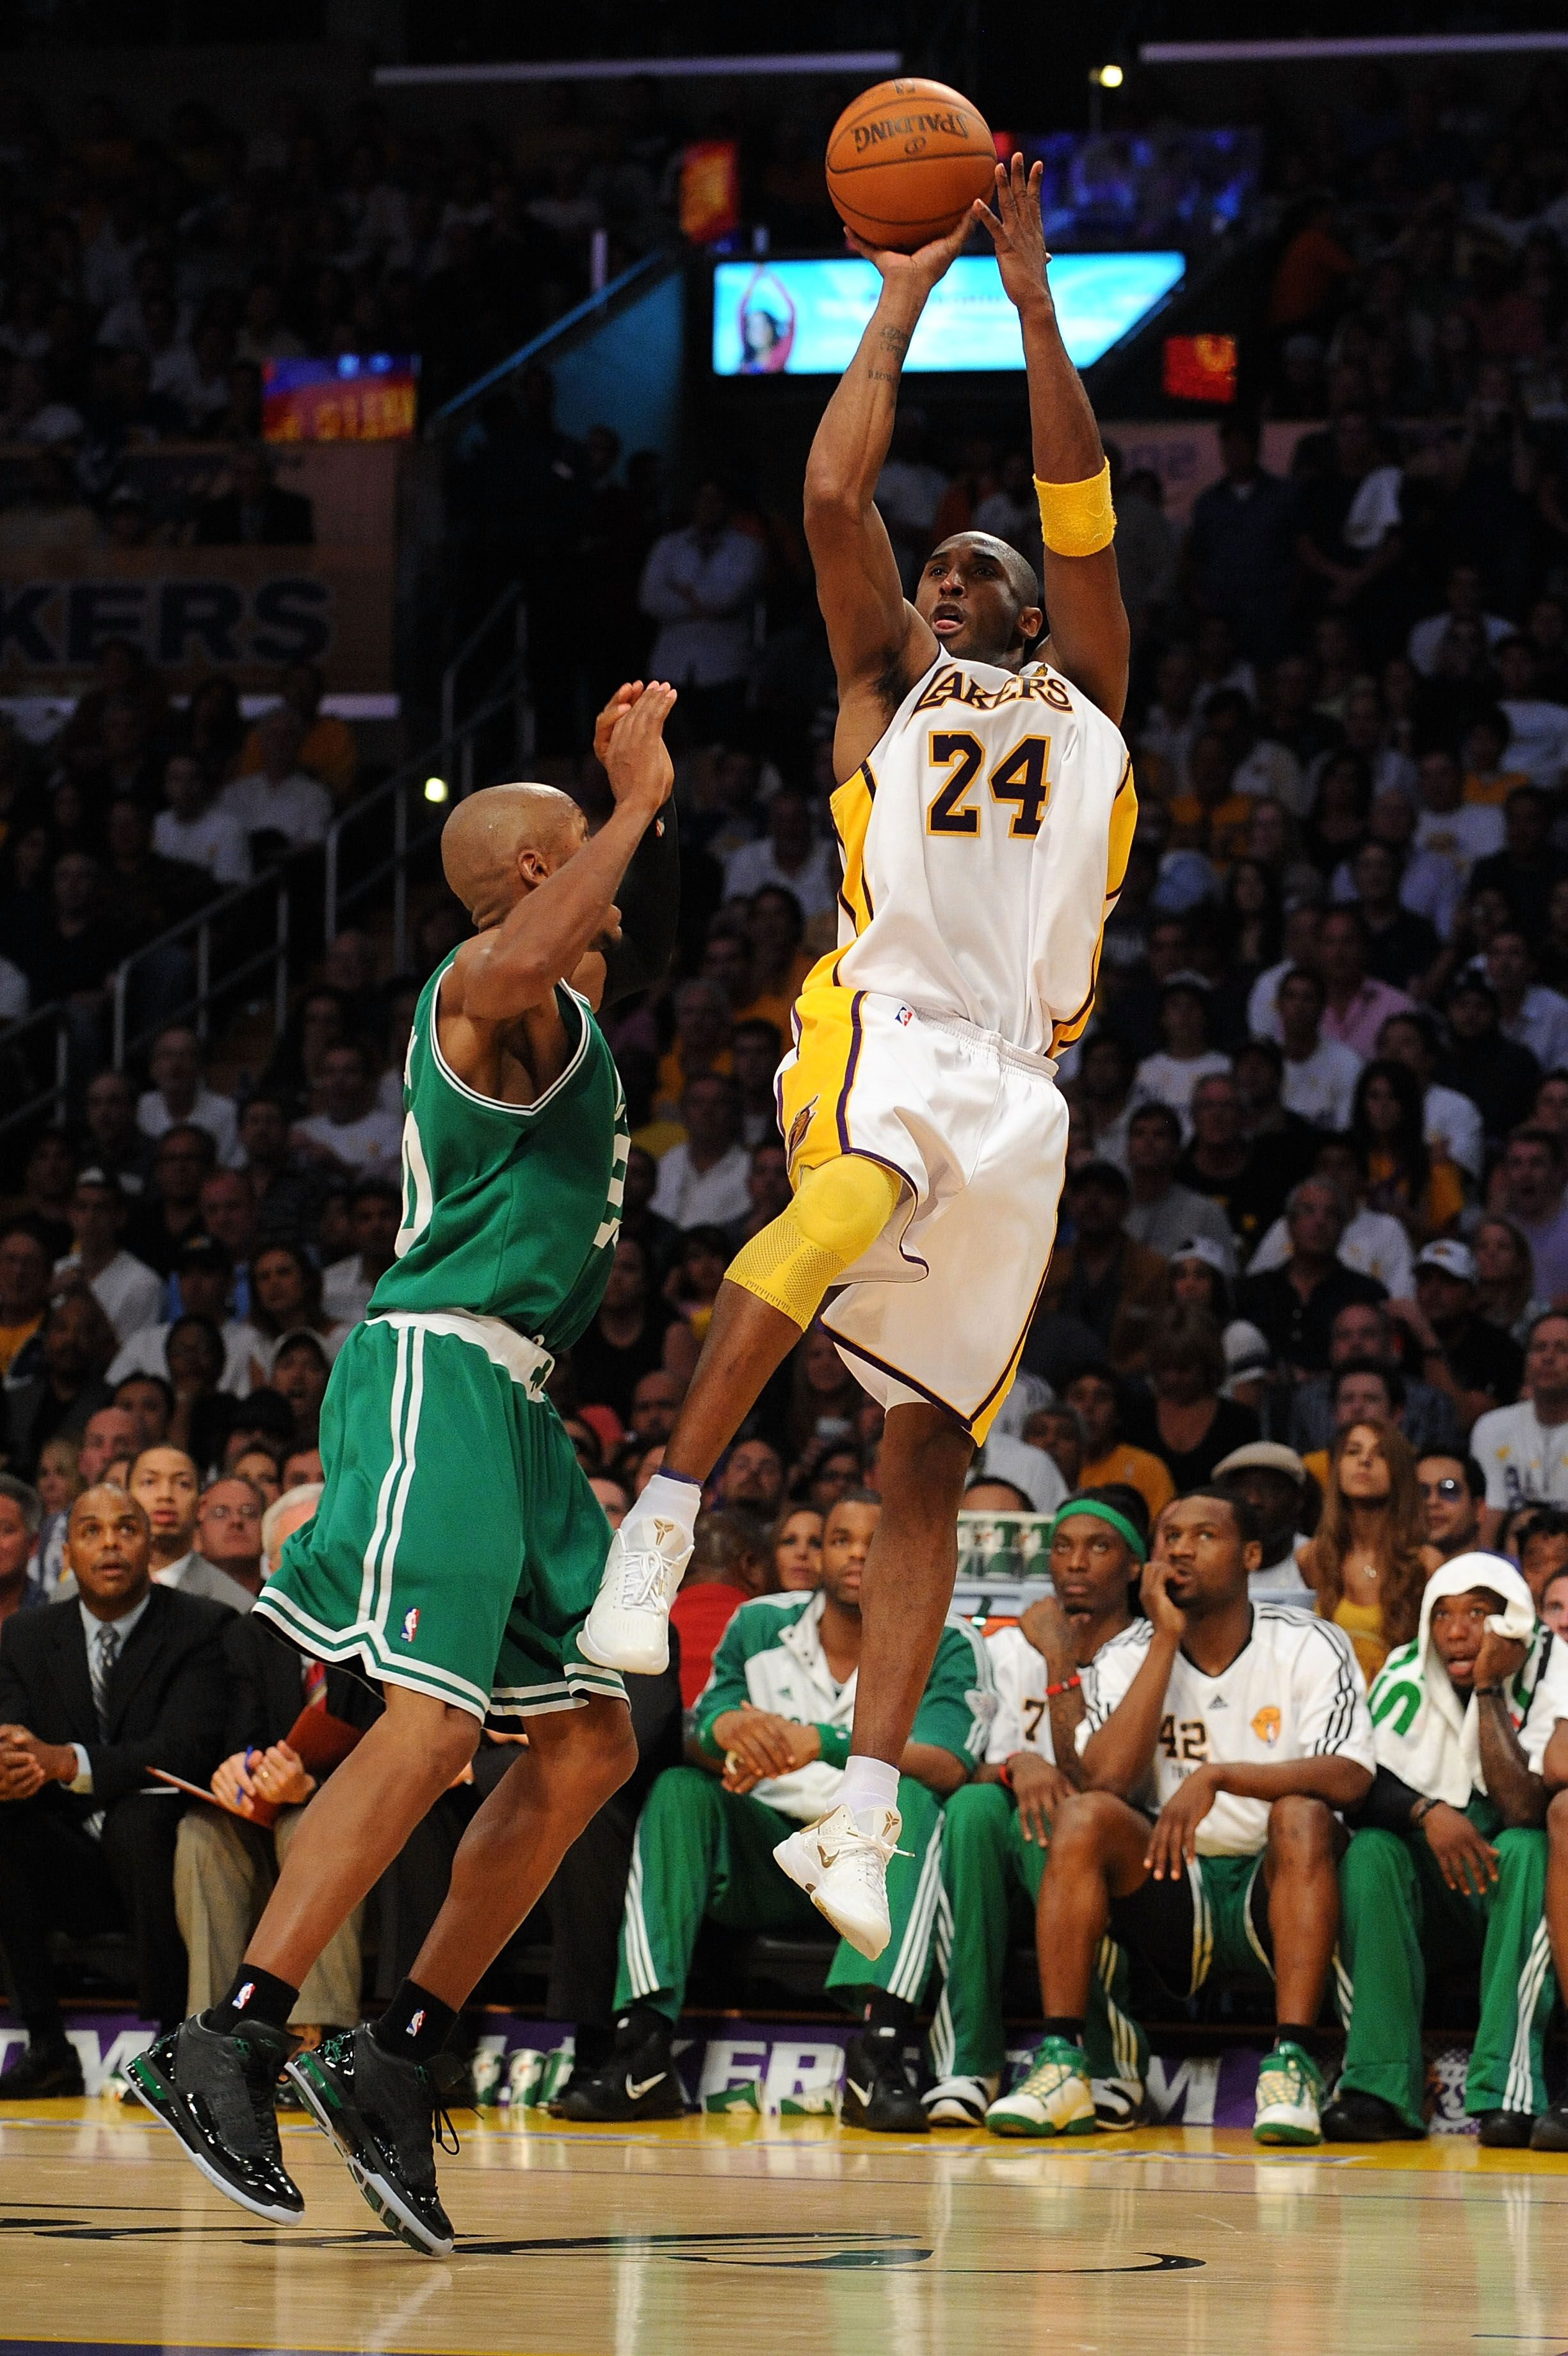 LOS ANGELES, CA - JUNE 06:  Kobe Bryant #24 of the Los Angeles Lakers attempts a shot against Ray Allen #20 of the Boston Celtics in Game Two of the 2010 NBA Finals at Staples Center on June 6, 2010 in Los Angeles, California. NOTE TO USER: User expressly